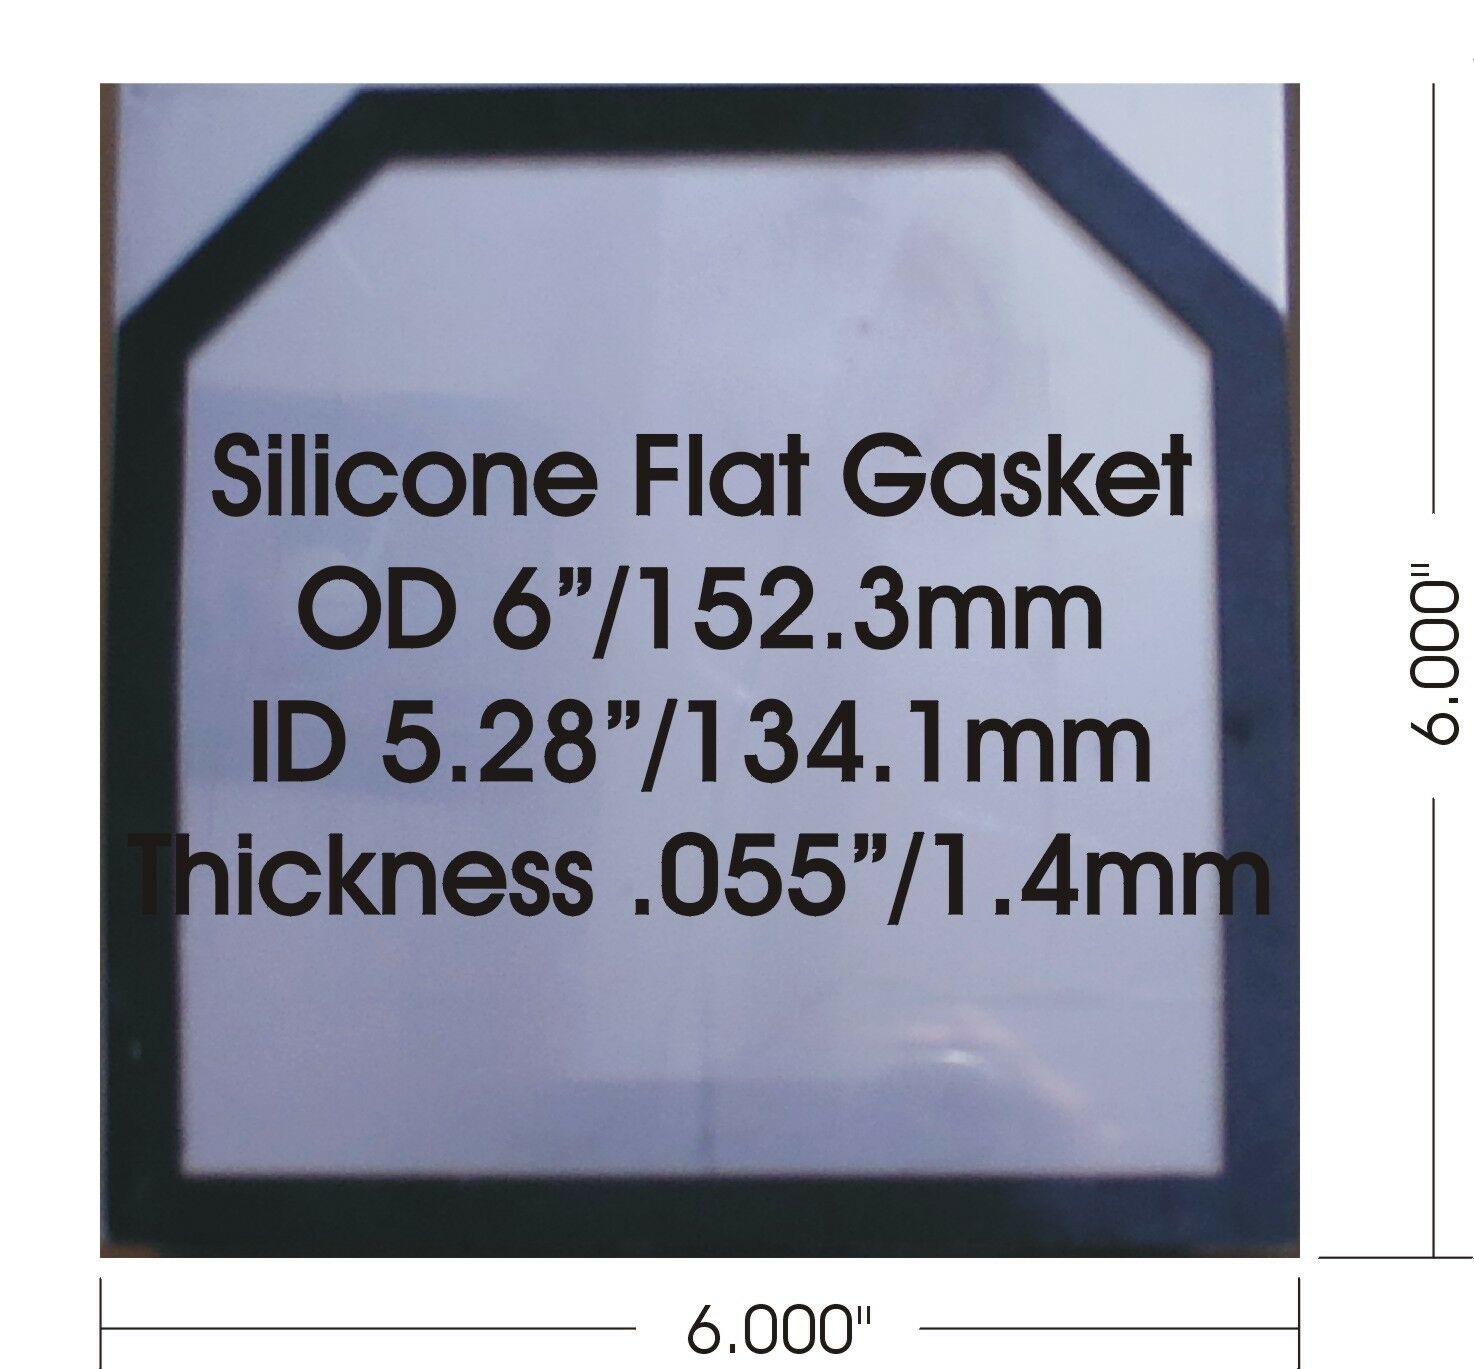 50 Pcs High Temp 1.4 Mm/0.055" Flat Silicone Gaskets For 6"x6" Hho Dry Cell,